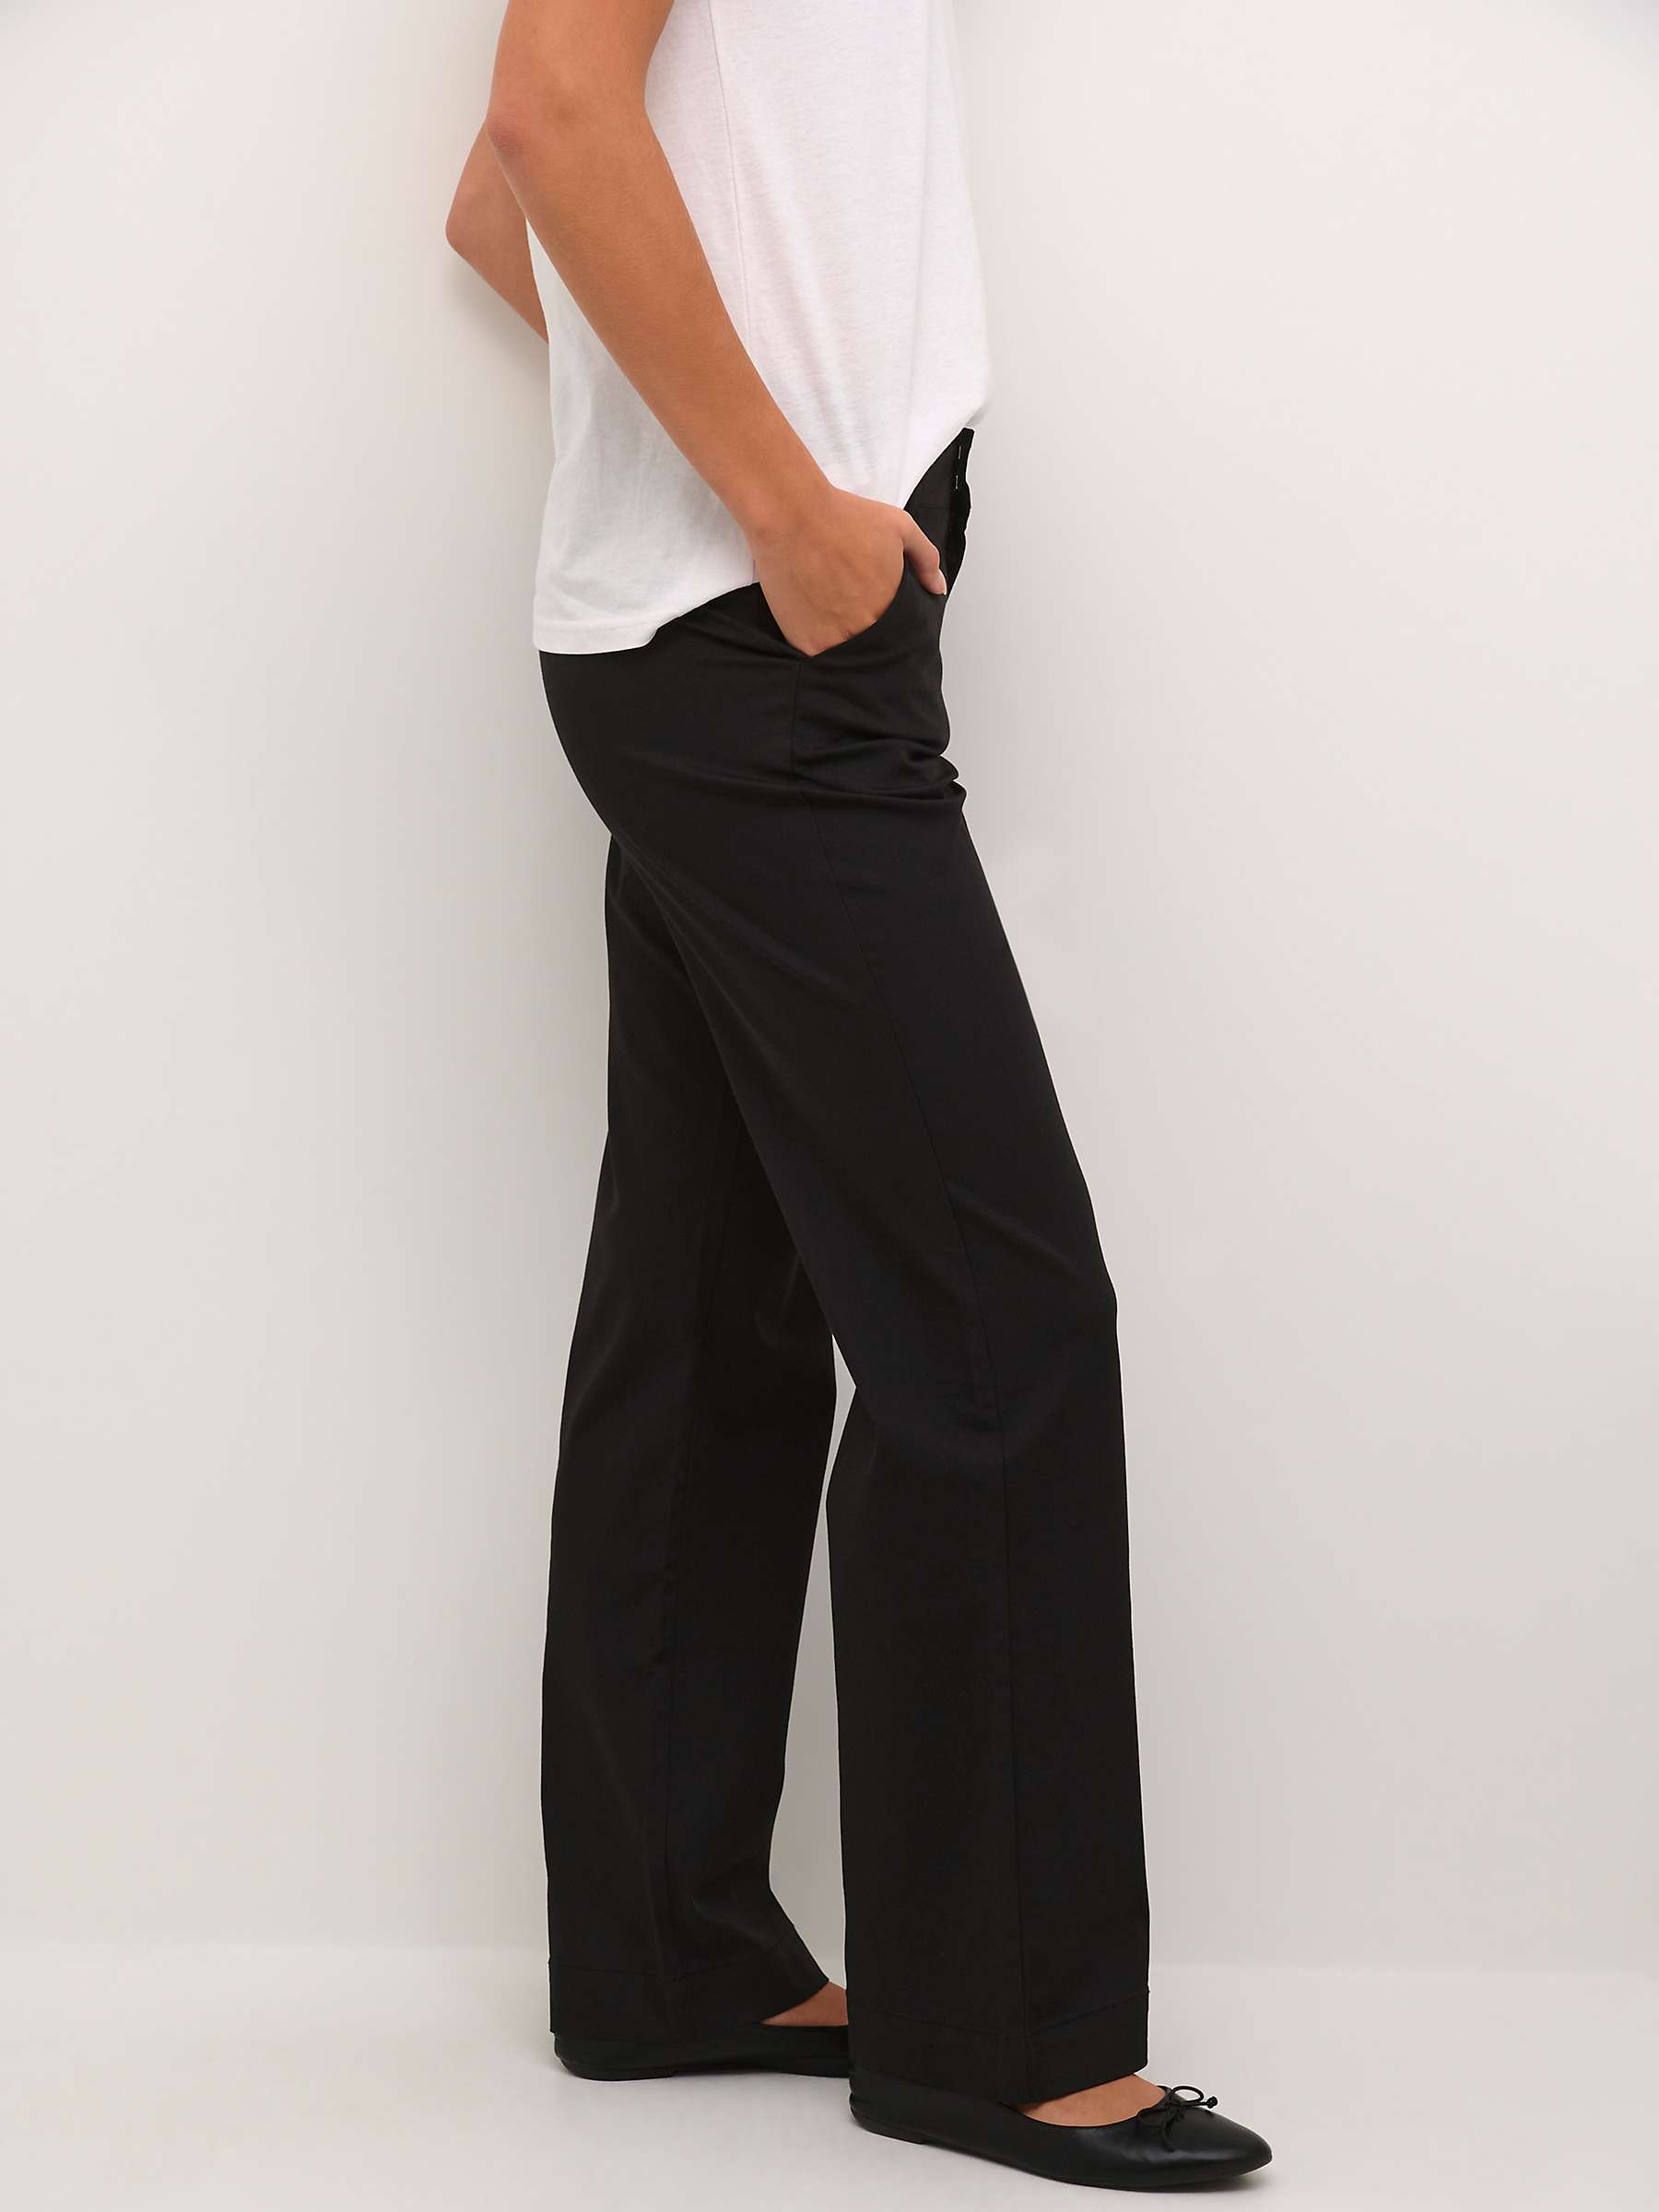 Buy KAFFE Lea Flared Chino Trousers, Deep Black Online at johnlewis.com